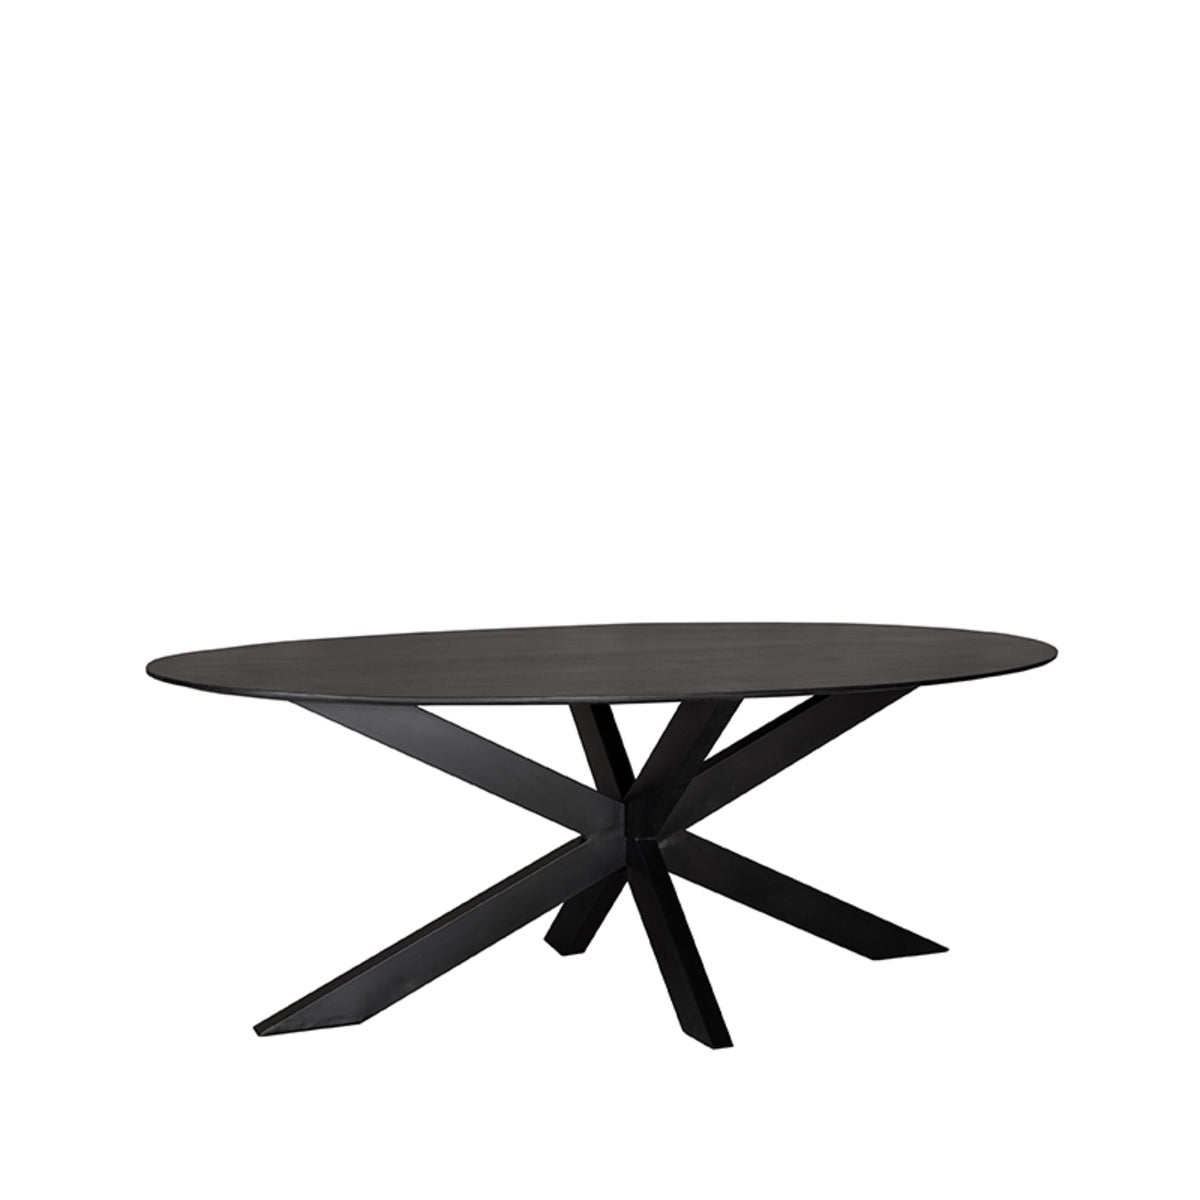 LABEL51 Zion dining room table - Black - Mango wood - Oval -